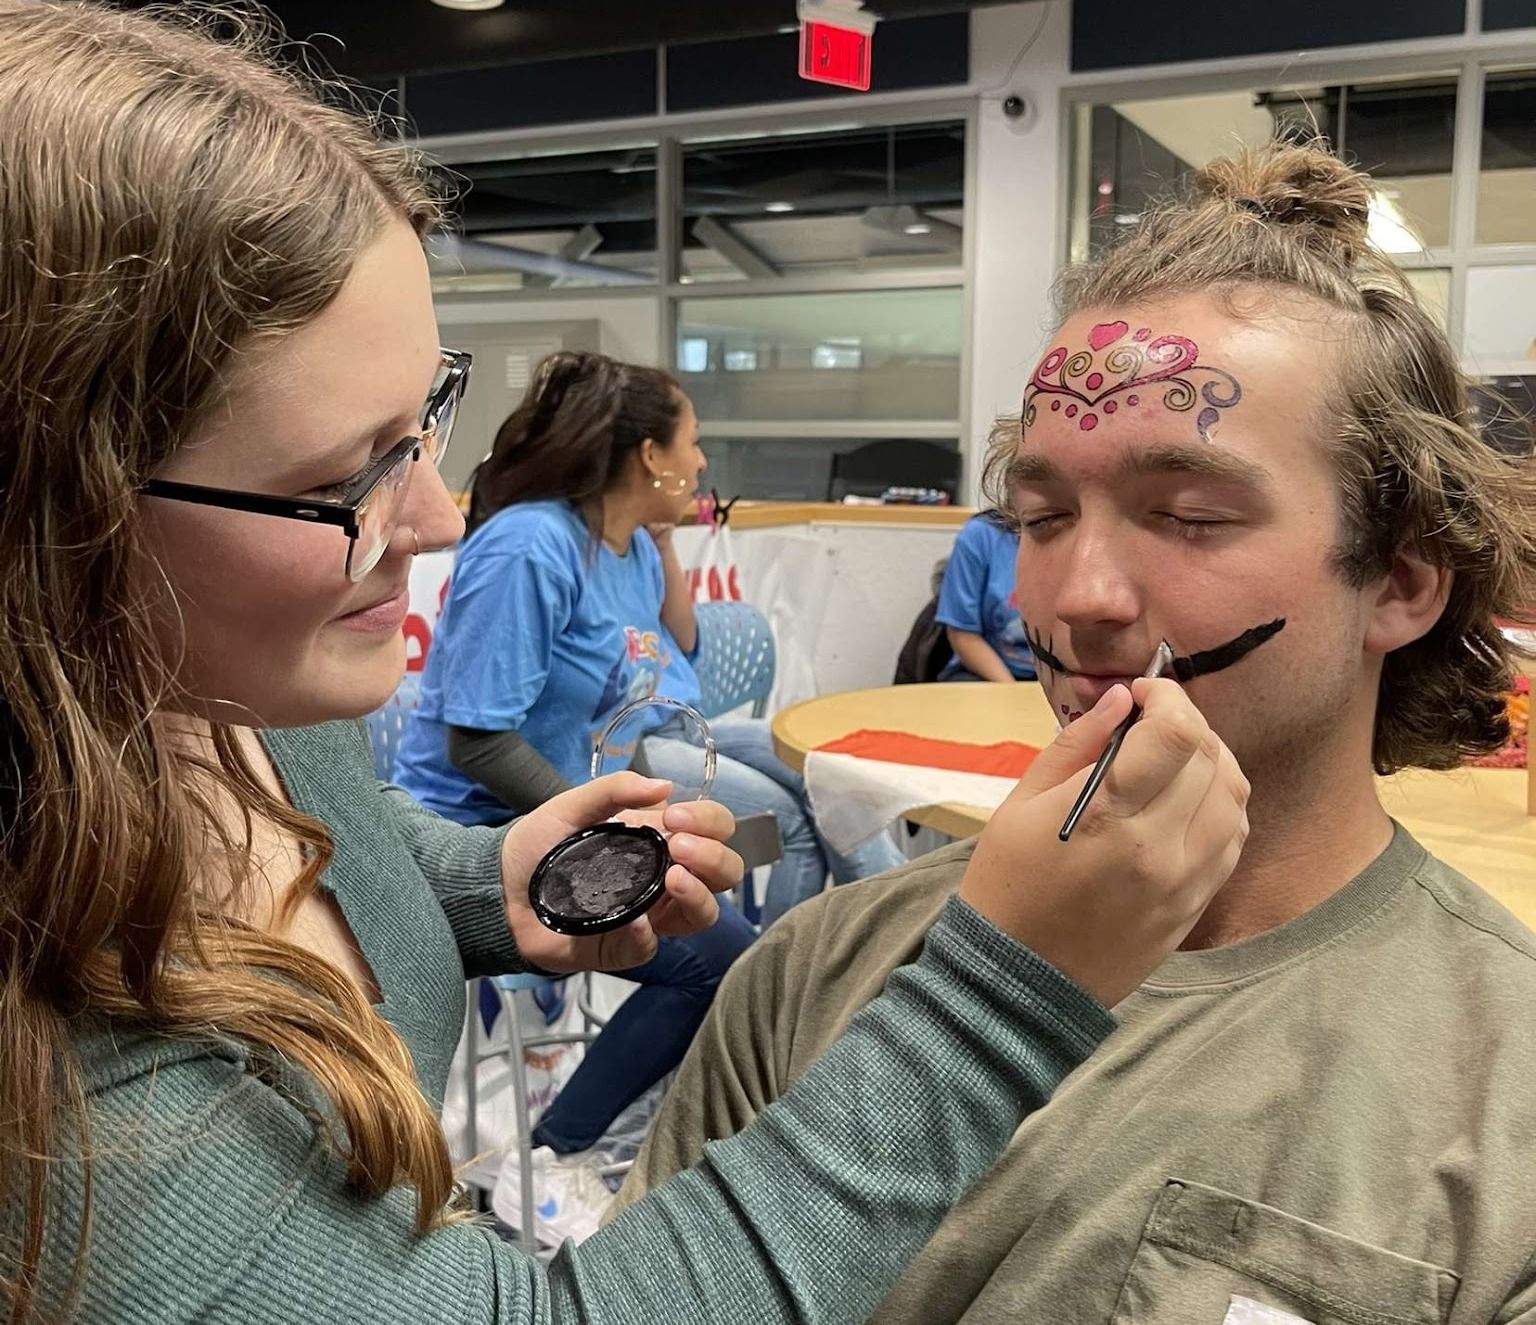 A person has their face painted.